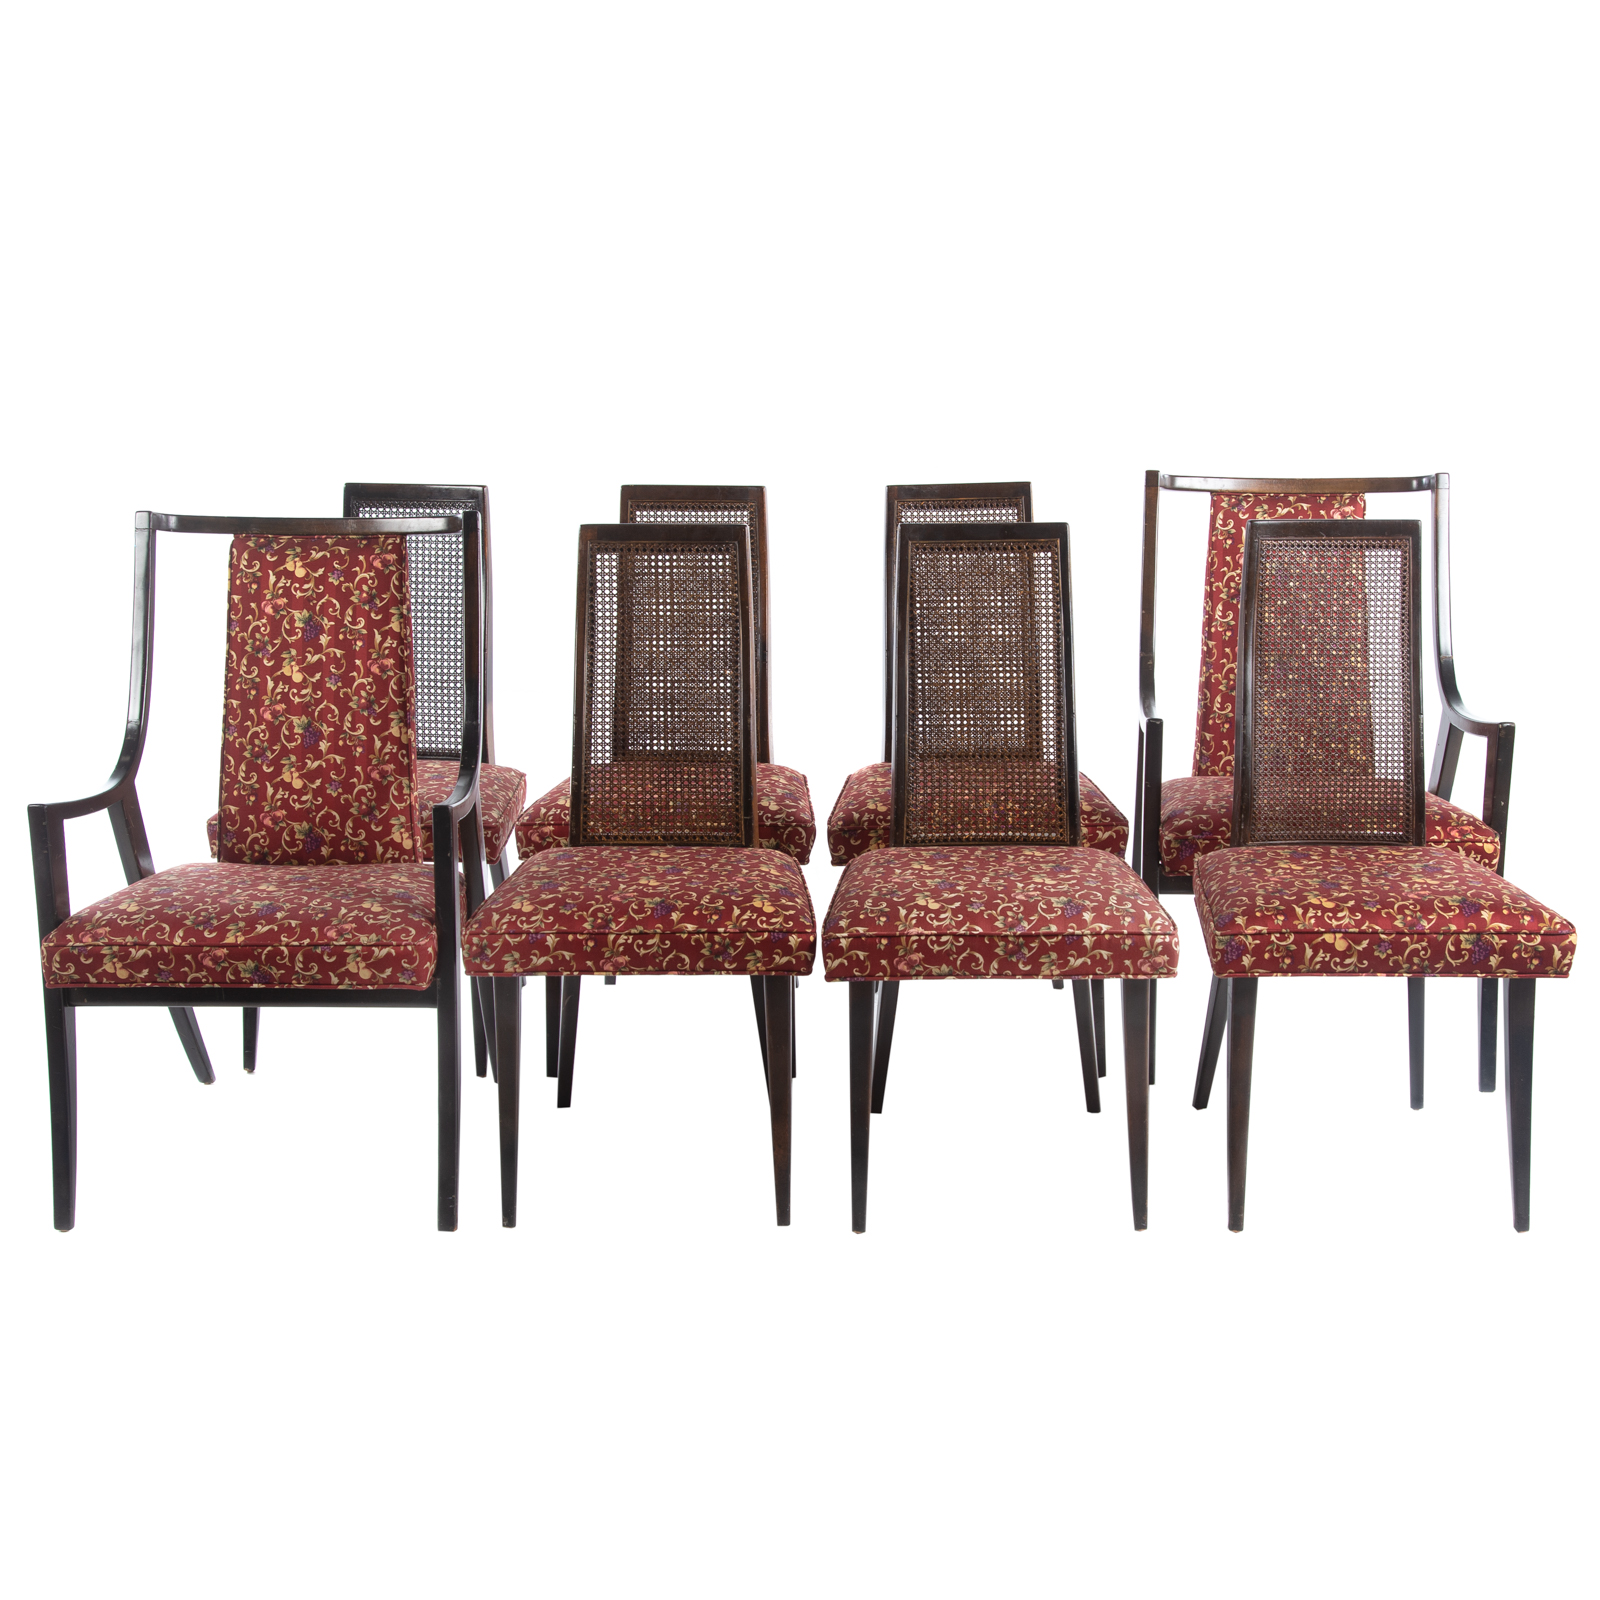 EIGHT HARVEY PROBBER DINING CHAIRS 3cb618